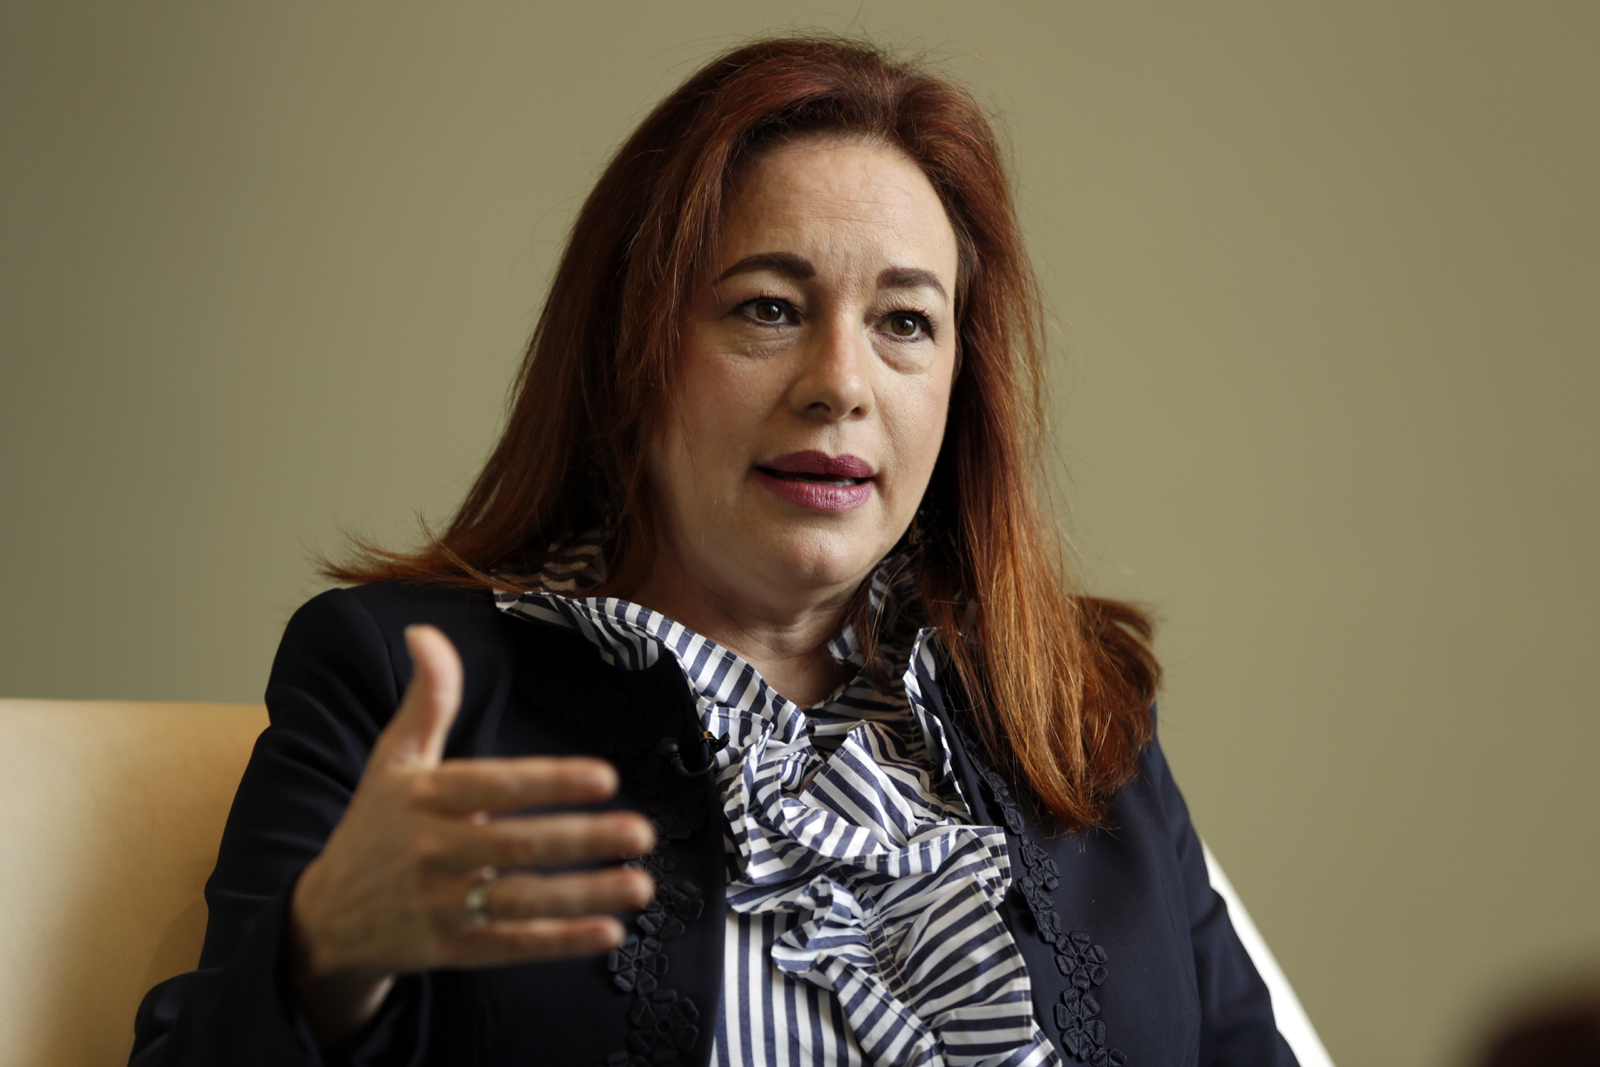 Ecuador's Foreign Minister Maria Fernanda Espinosa is interviewed at United Nations headquarters, Monday, June 4, 2018. [Photo: AP/Richard Drew]